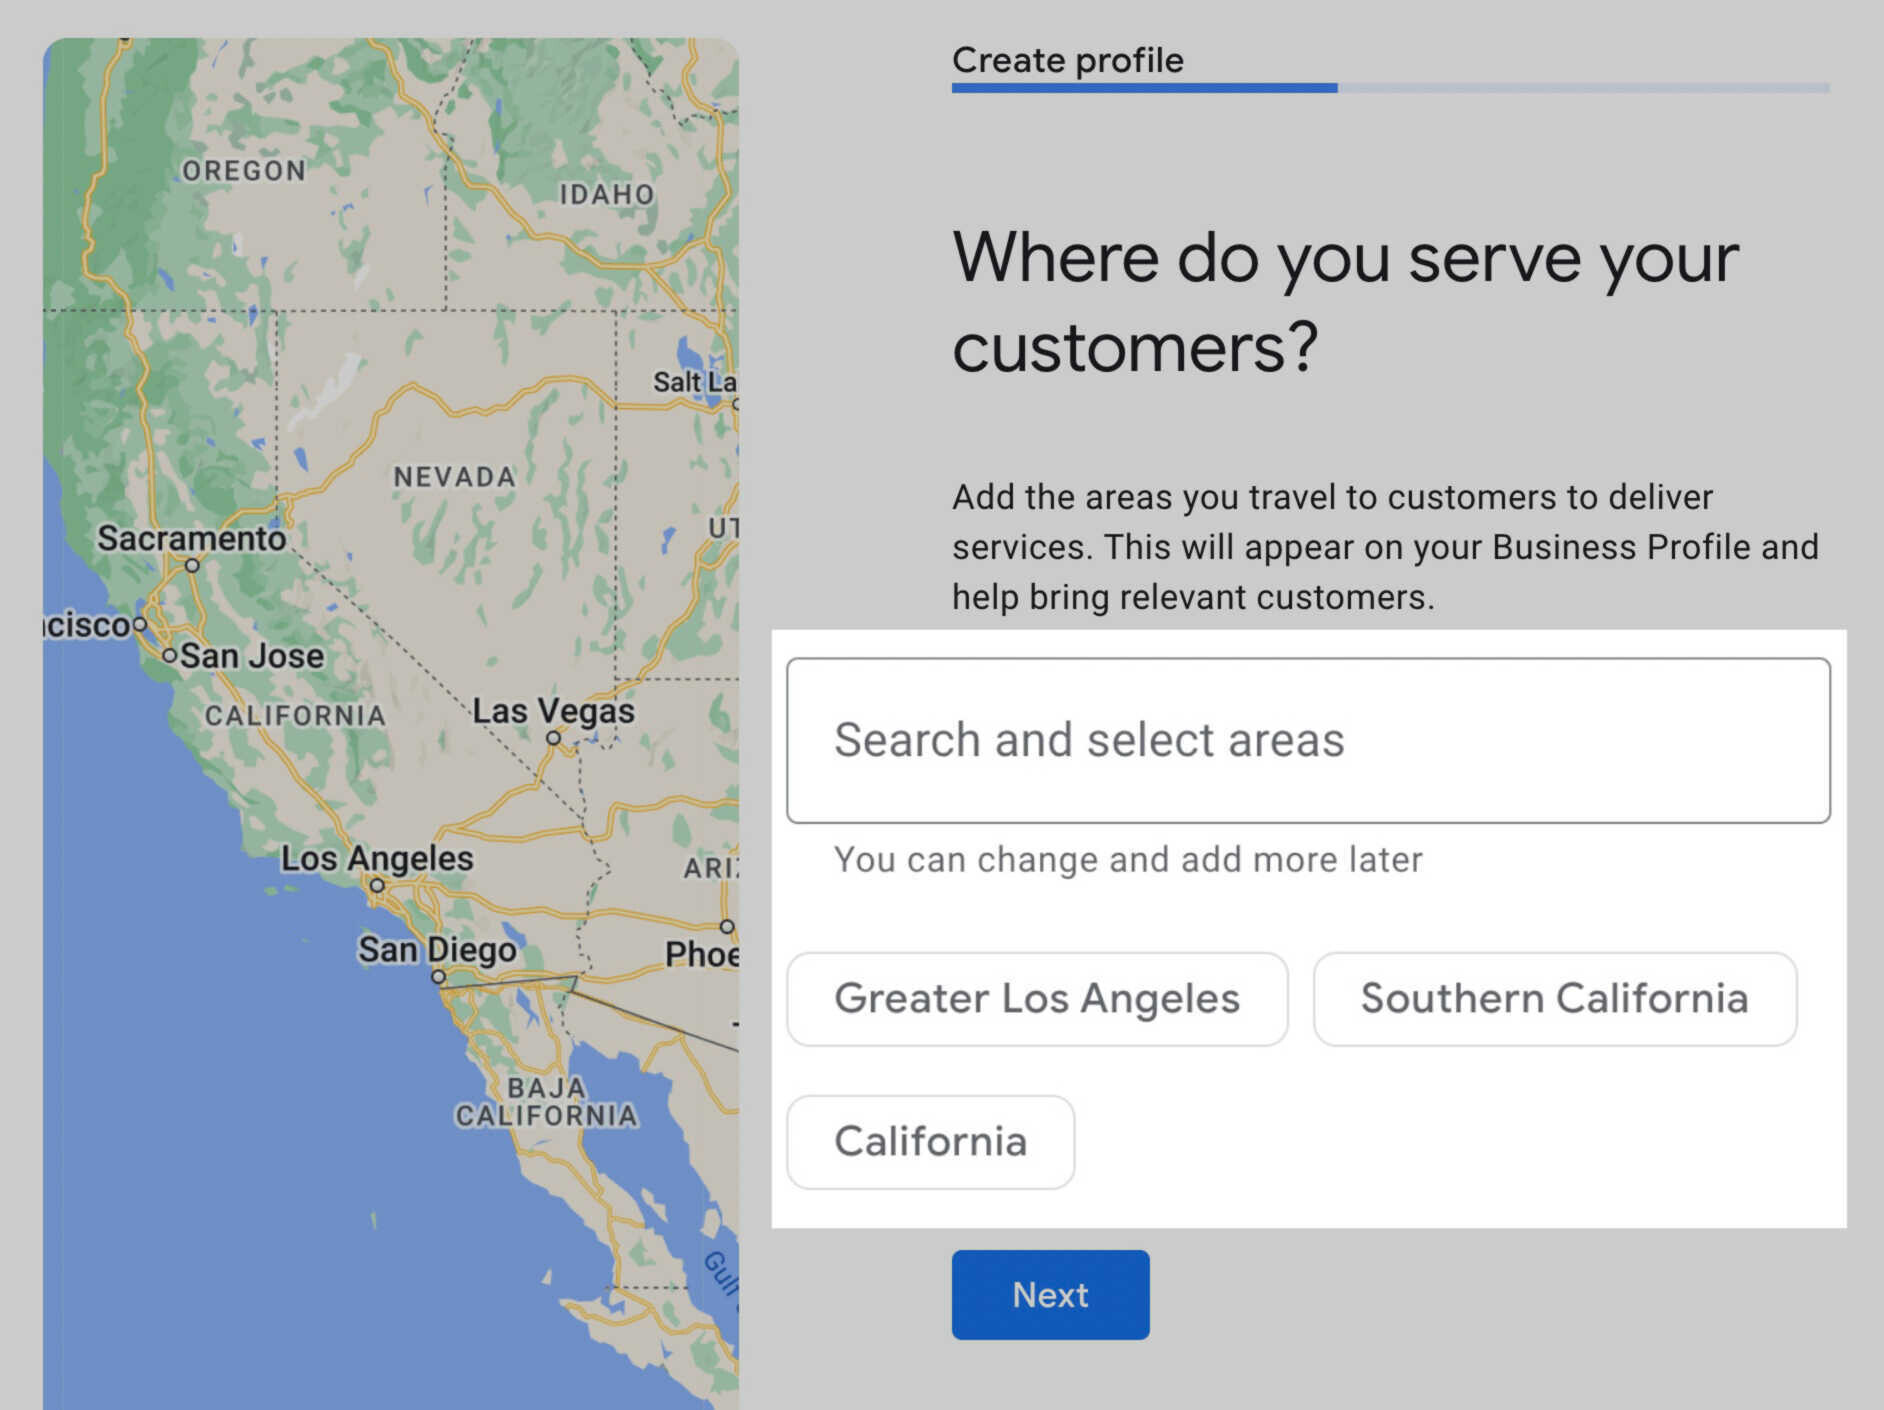 search and select business areas from Google's suggestions